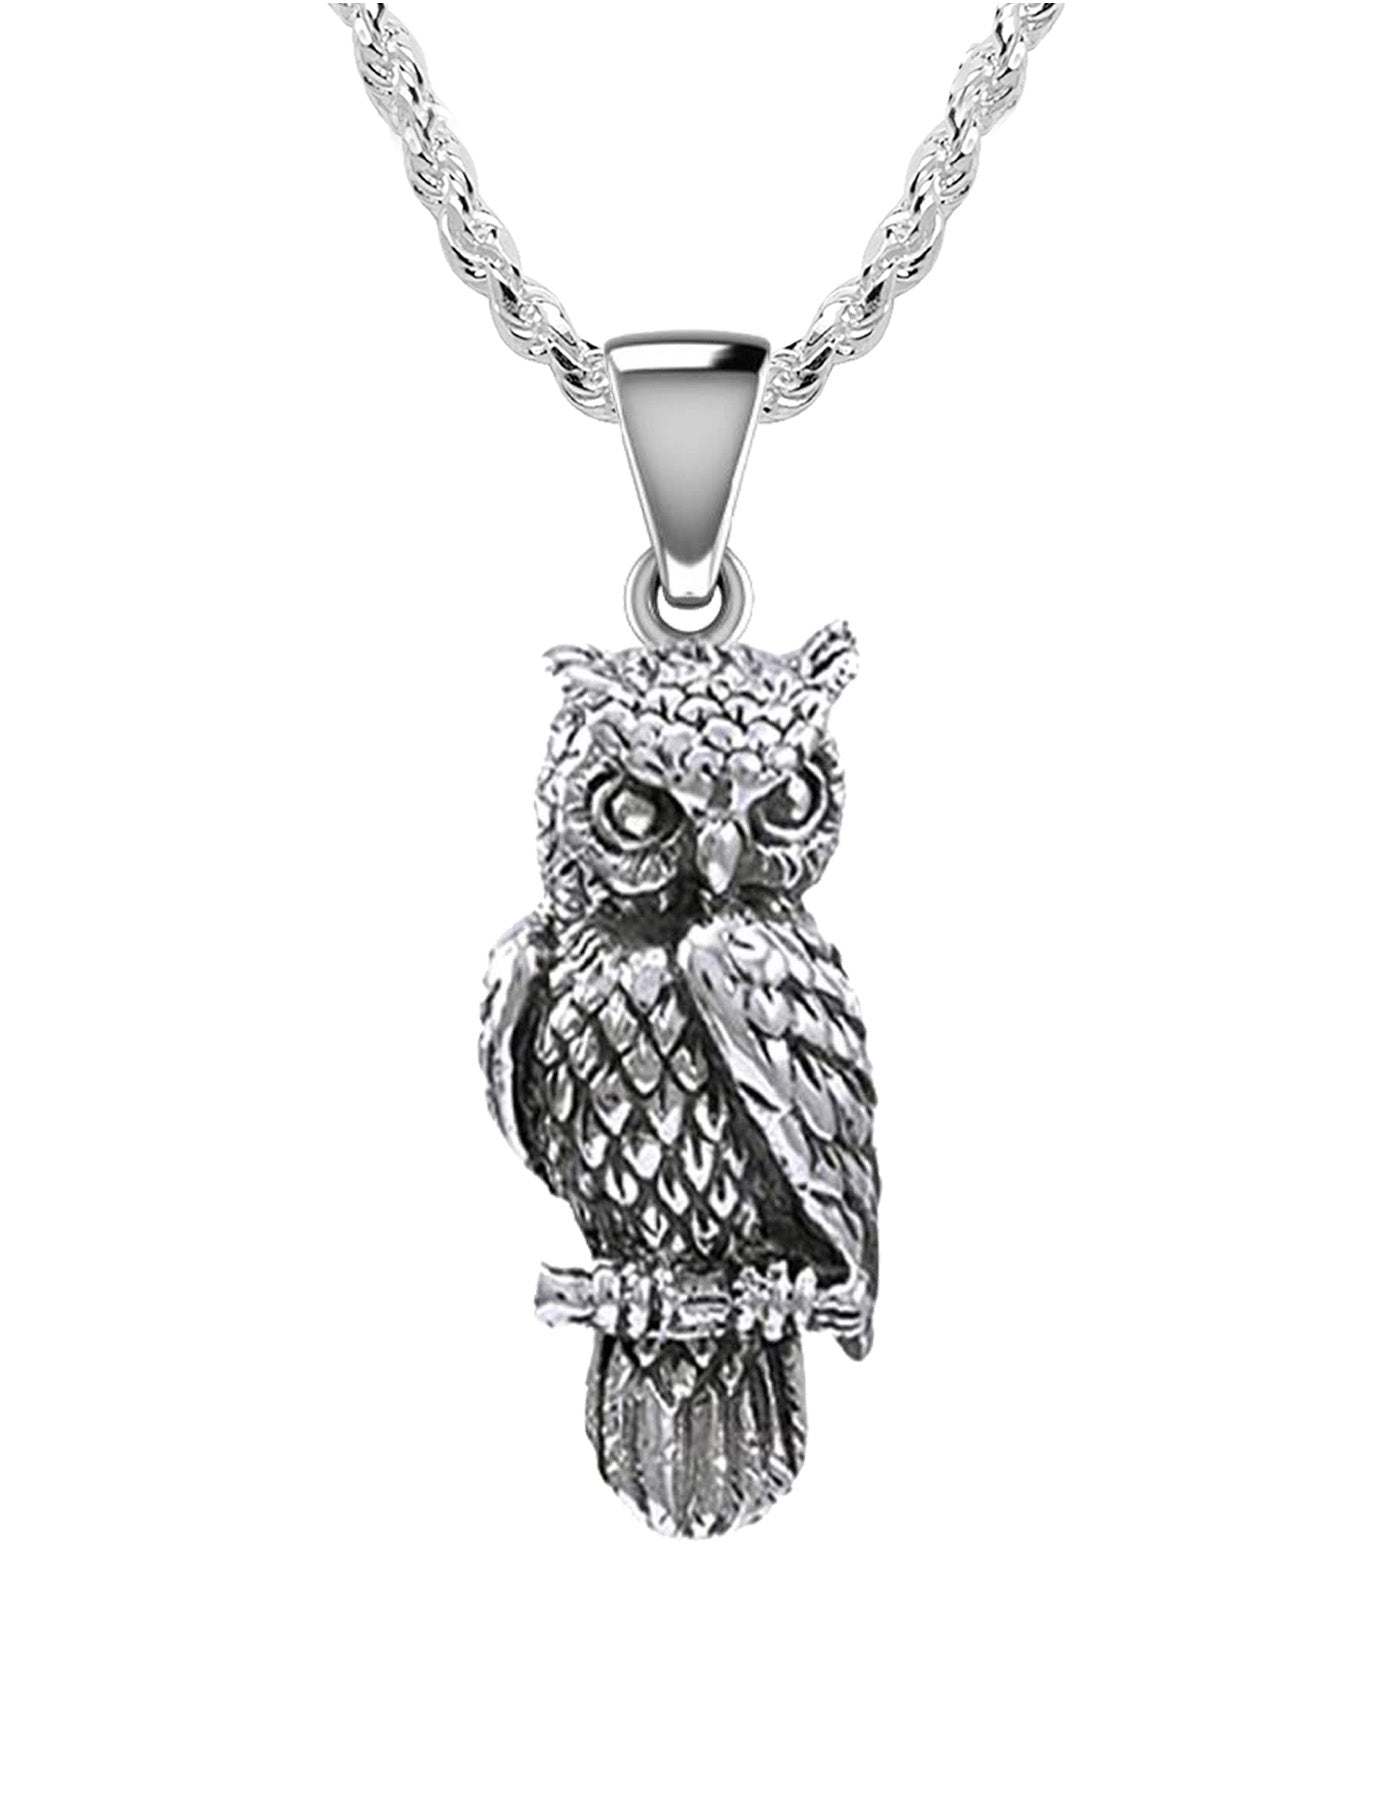 The Owl House Charms -  Sweden